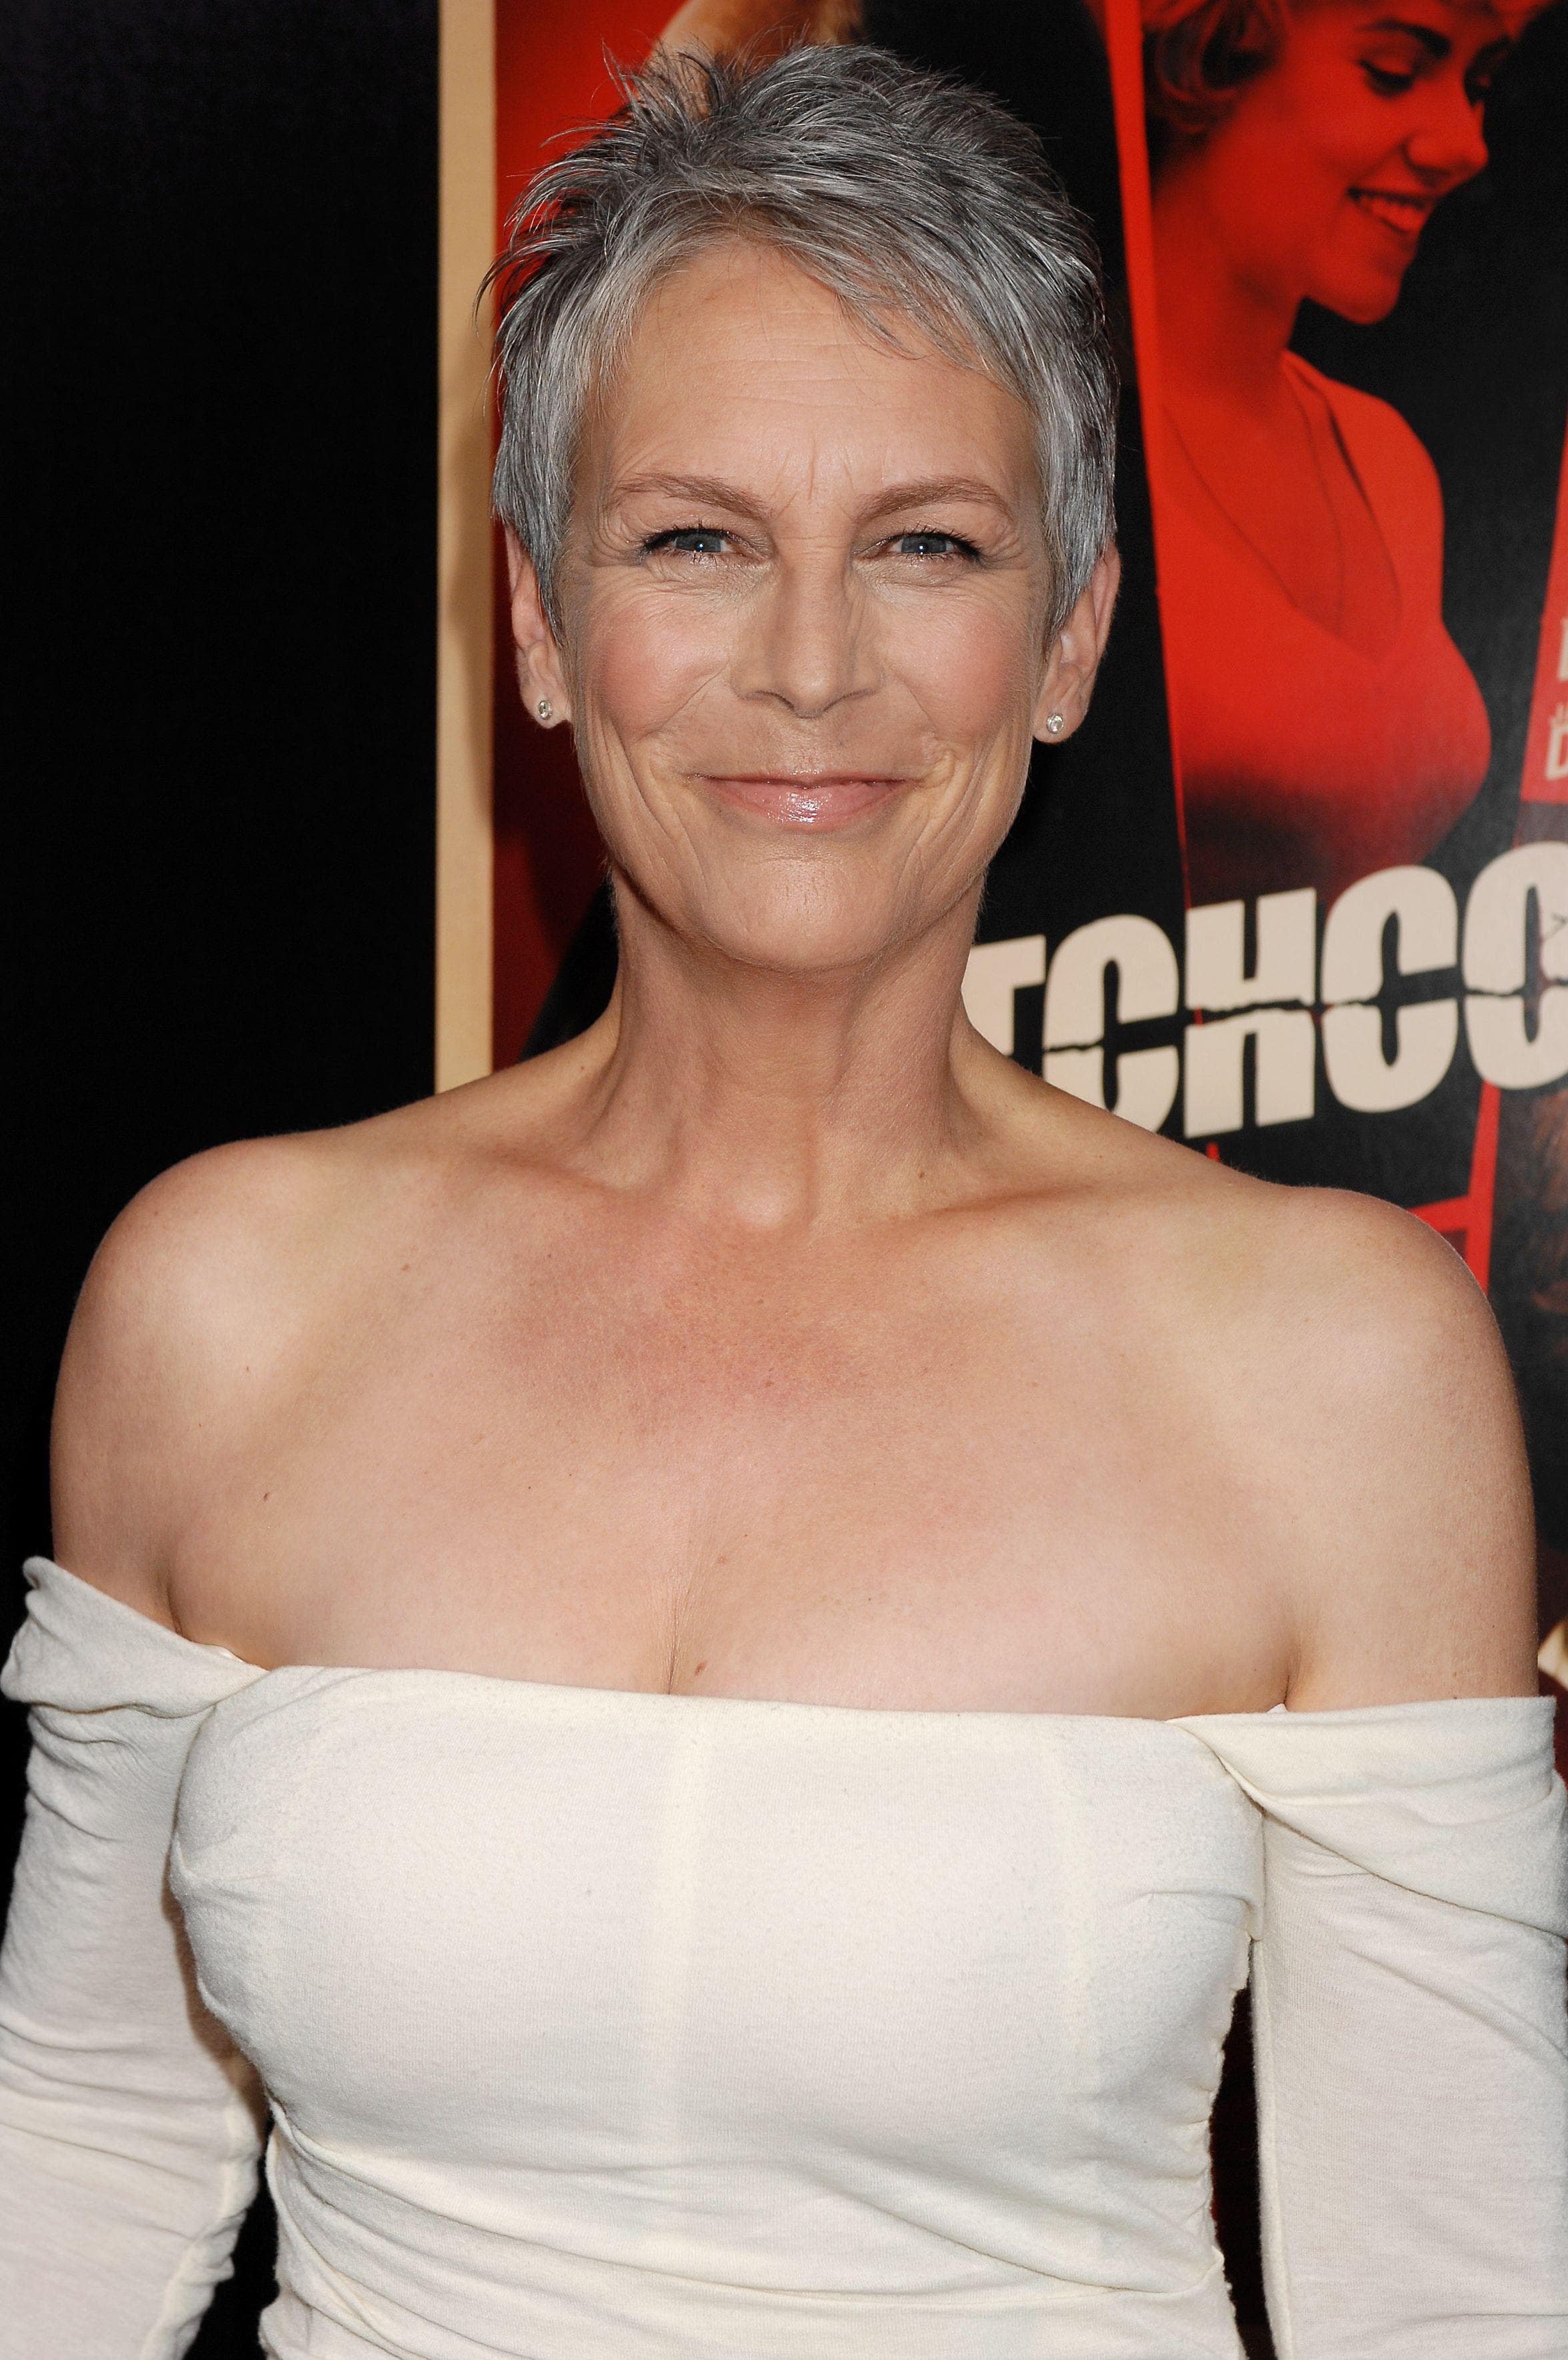 Random Delightful Things You Didn't Know About Jamie Lee Curtis